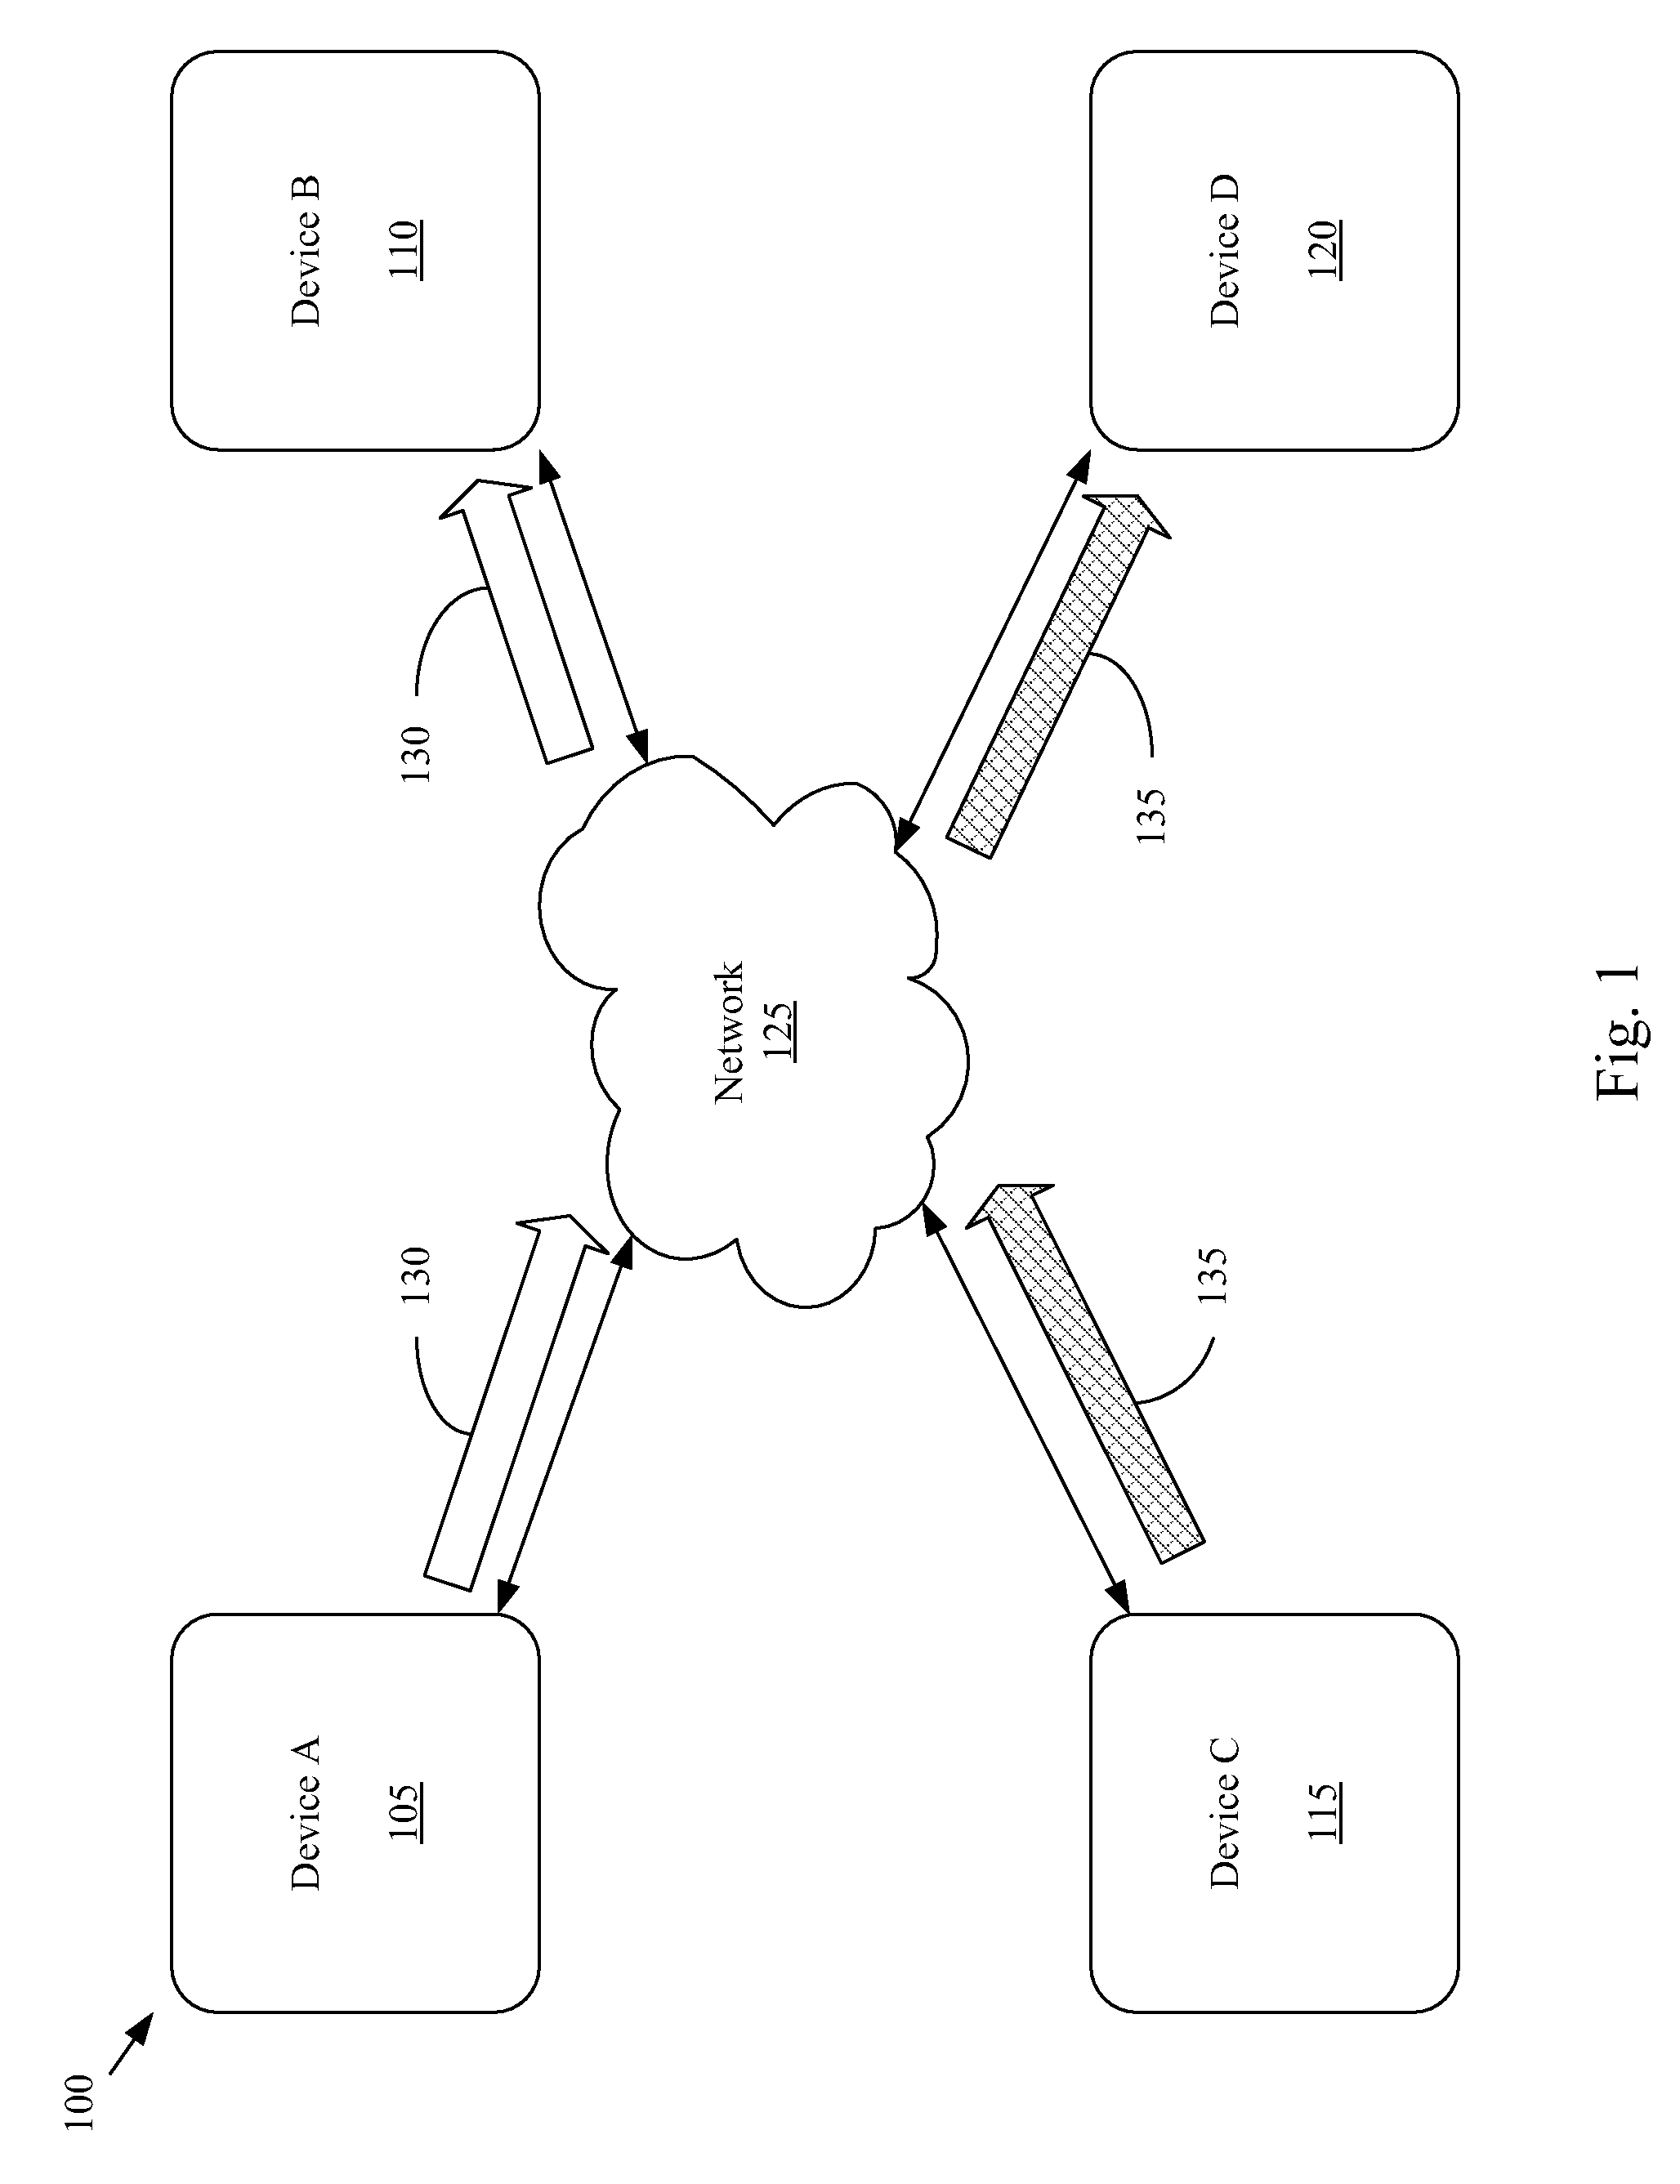 Bandwidth reservation for data flows in interconnection networks